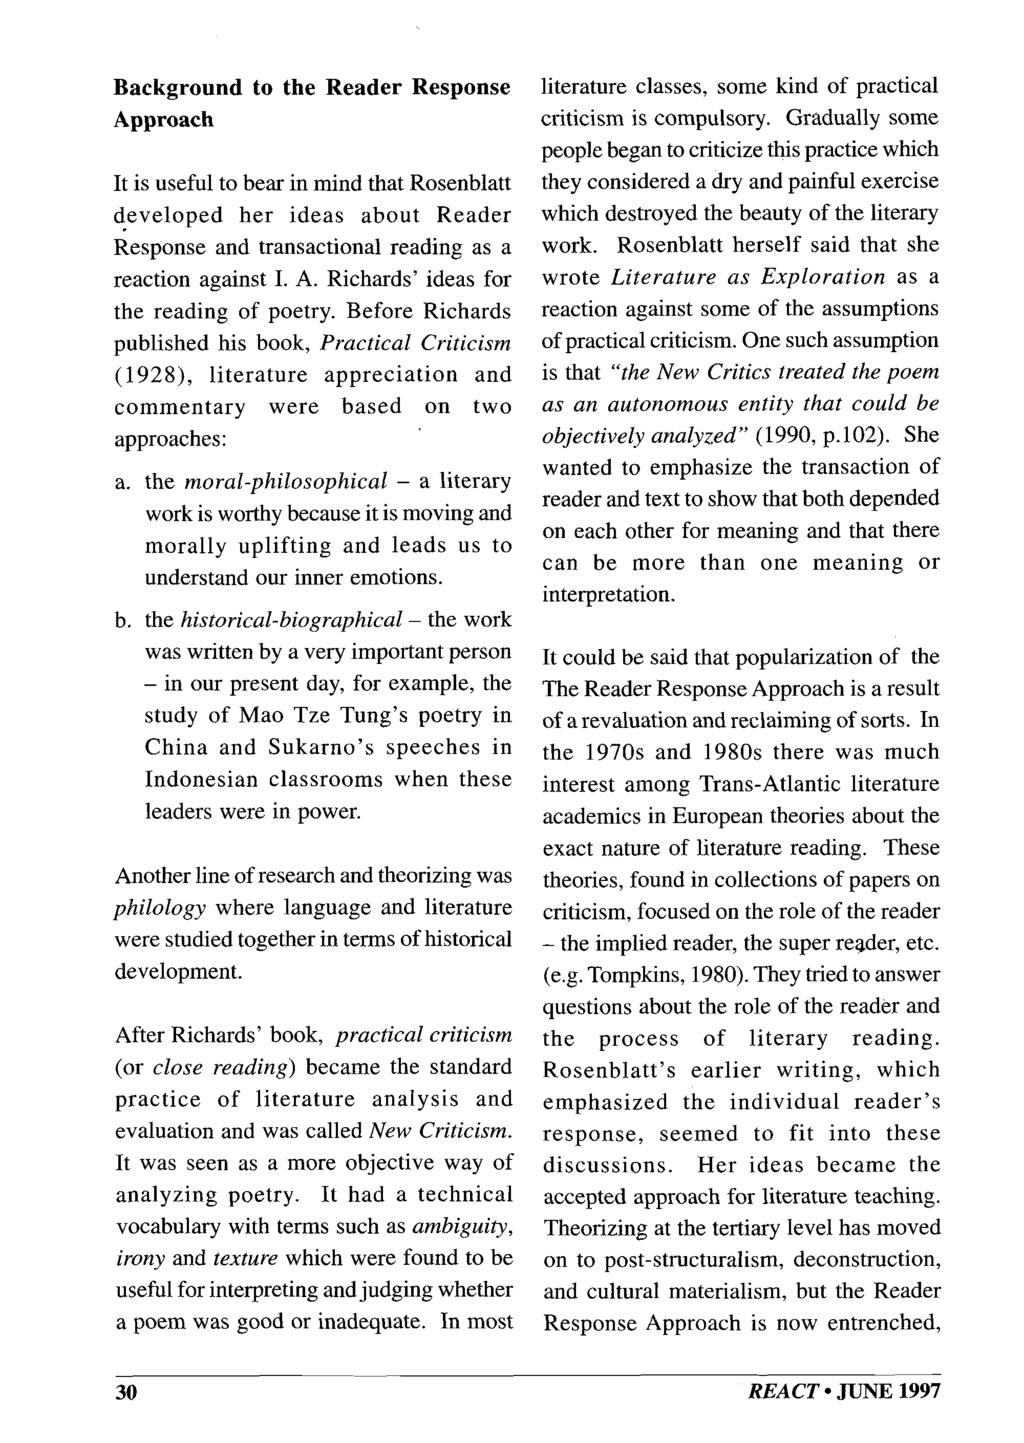 Background to the Reader Response Approach It is useful to bear in mind that Rosenblatt developed her ideas about Reader Response and transactional reading as a reaction against I. A. Richards' ideas for the reading of poetry.